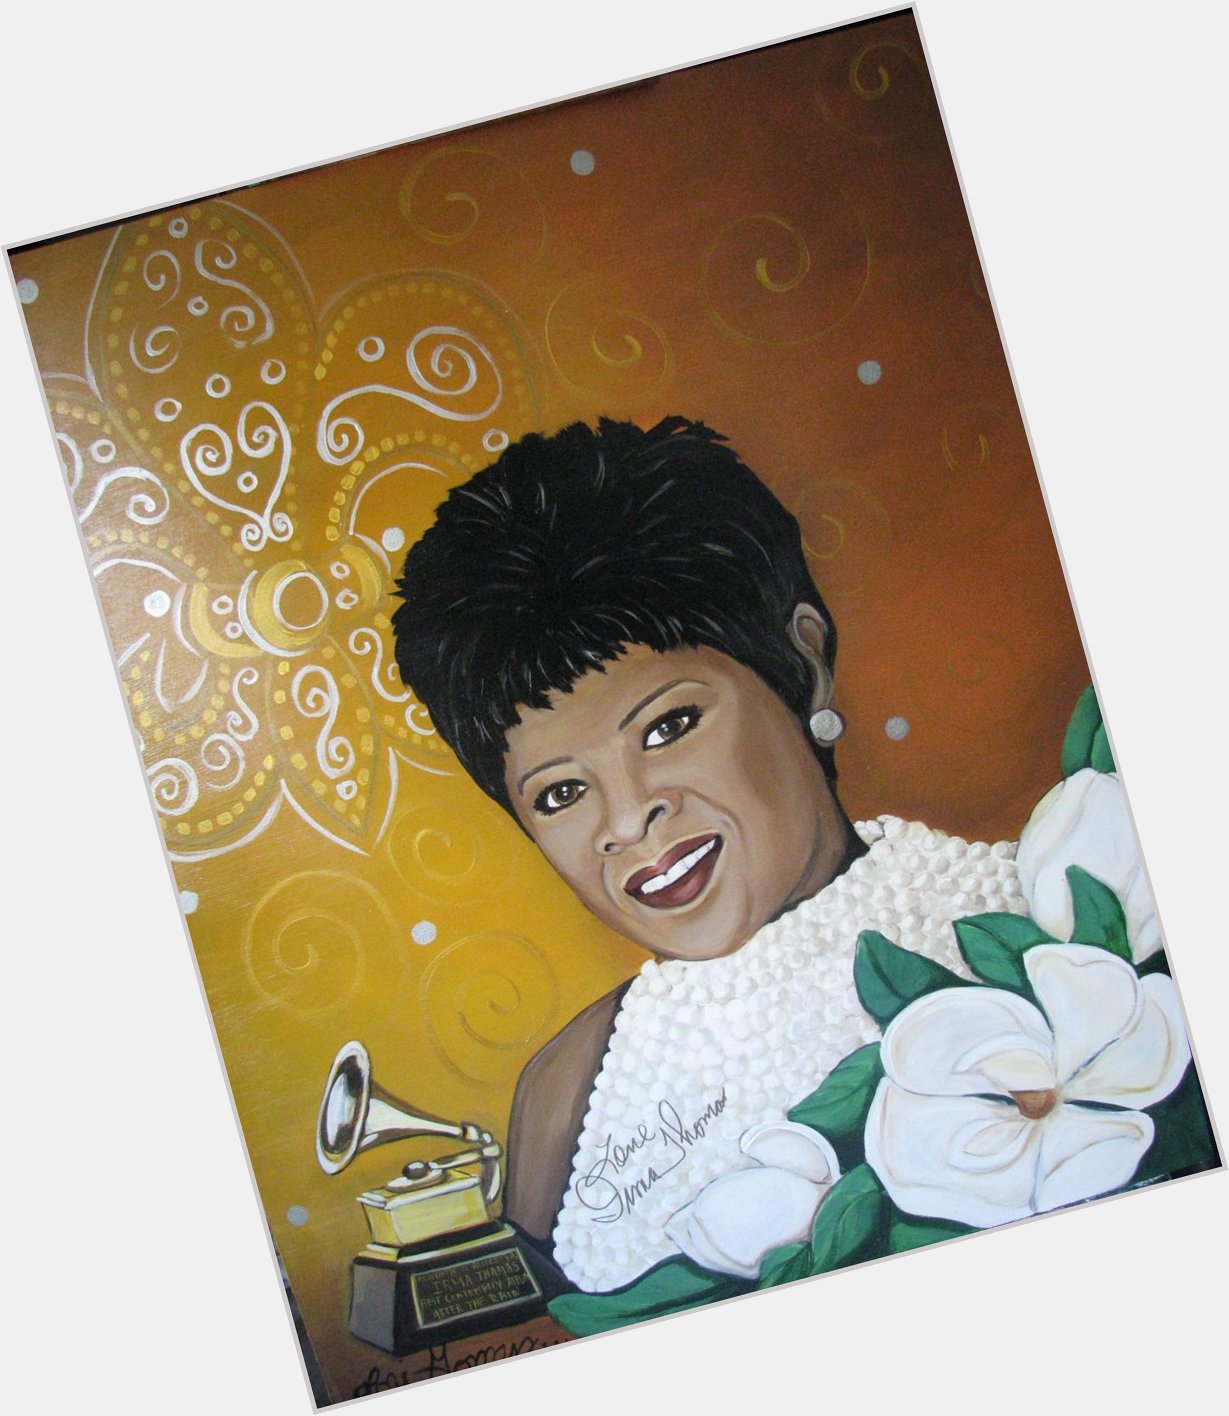 Lori Gomez Art Wants to wish Ms. Irma Thomas a Happy Birthday. This is a painting I did of her that she signed. 